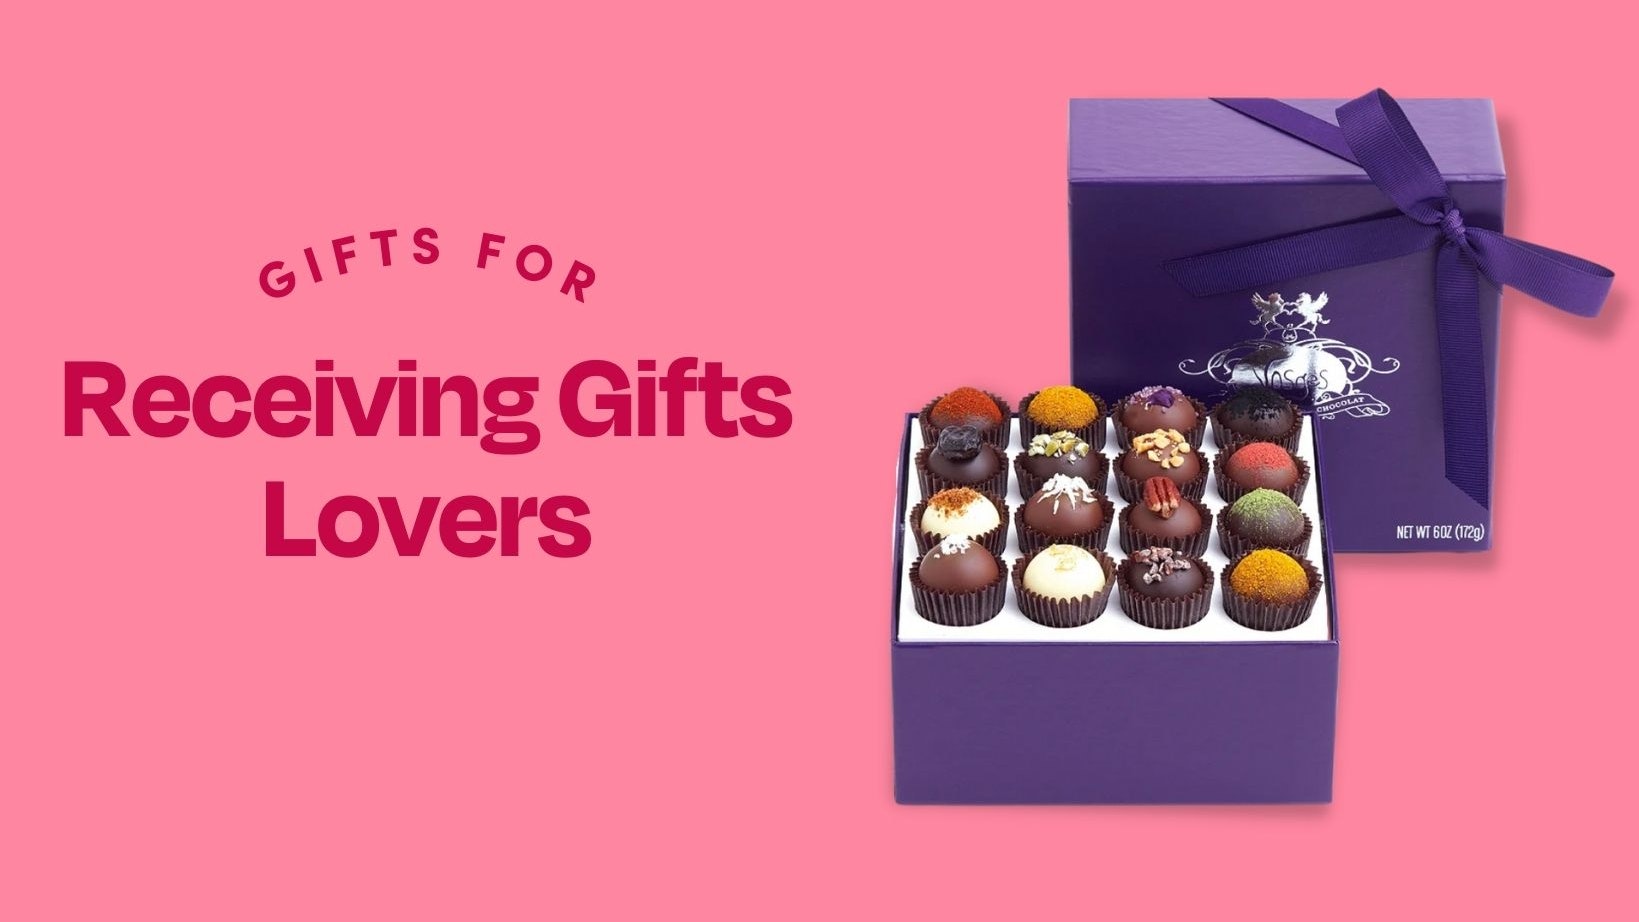 Gifts for Receiving Gifts Lovers